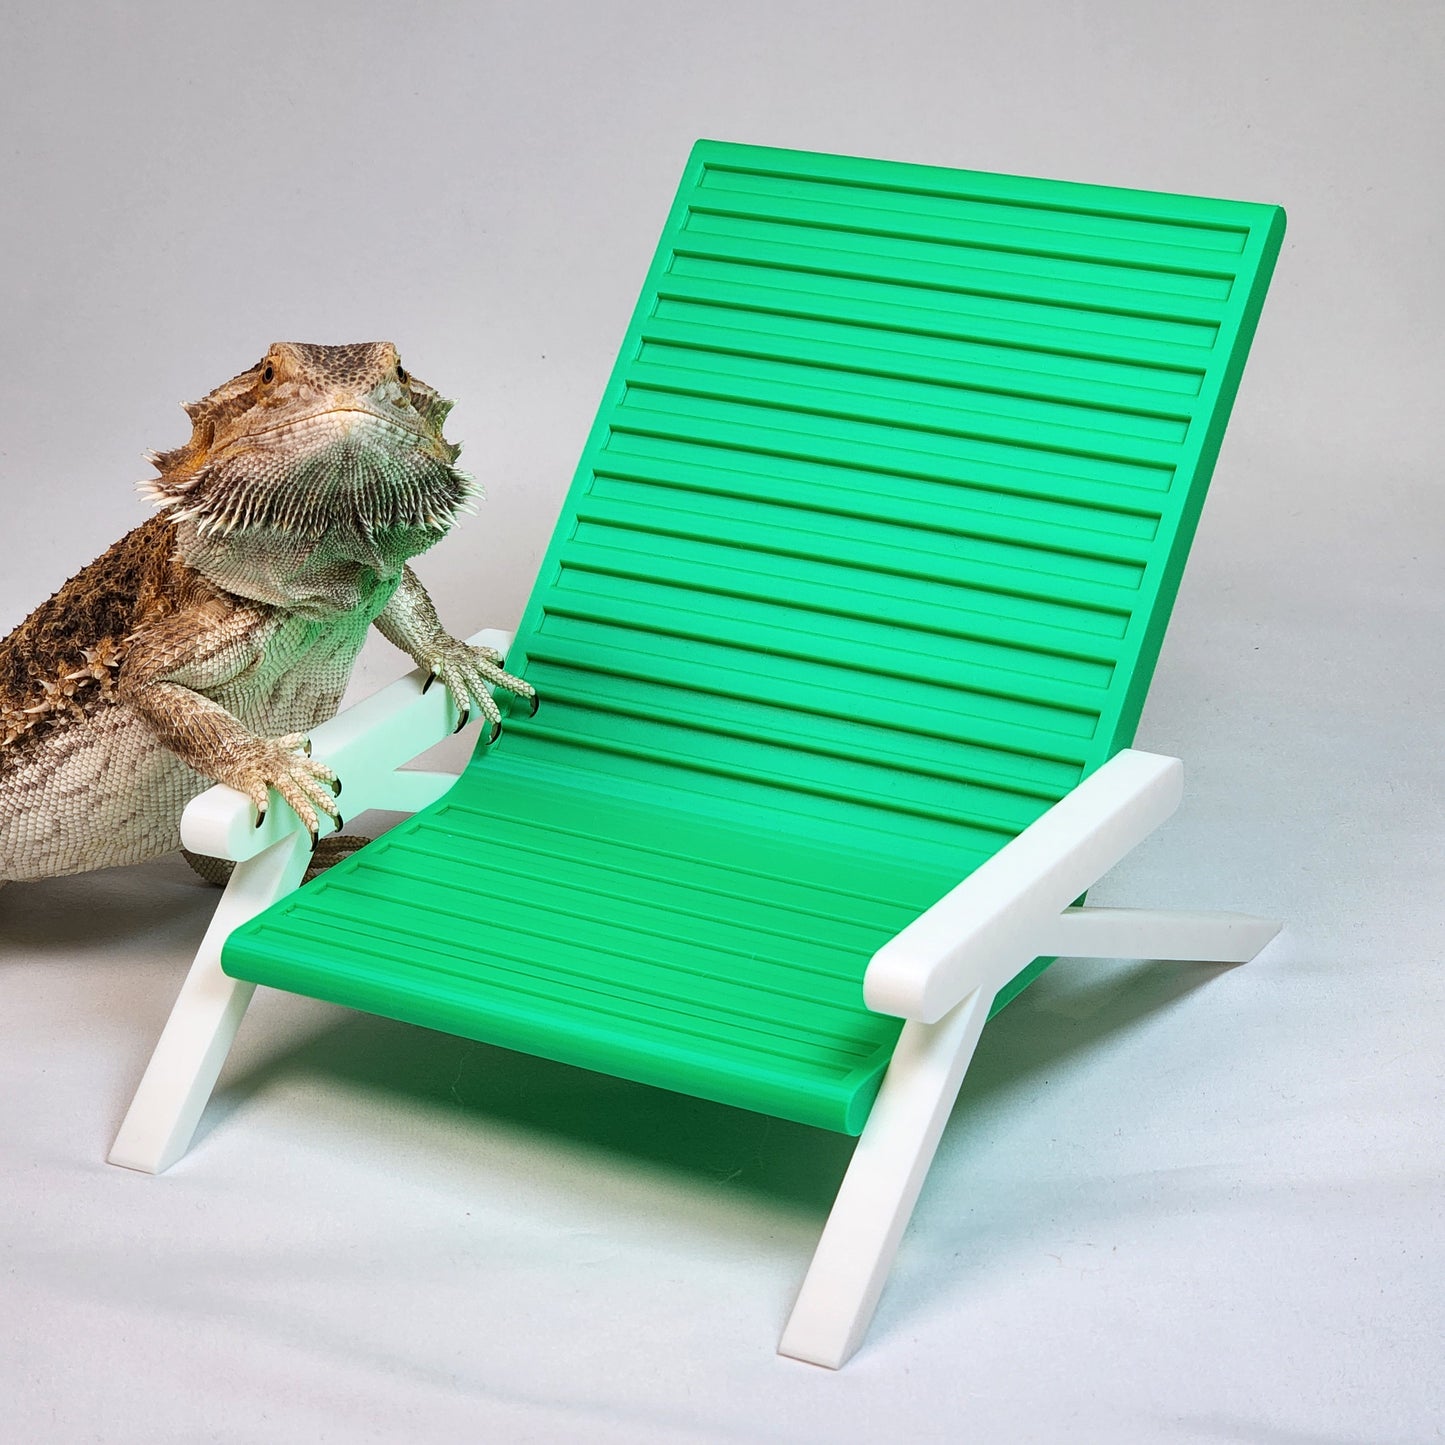 Reptile Beach Lounging Chair | Bearded dragon and leopard gecko hammock lounger and basking spot, Bearded dragon furniture decor